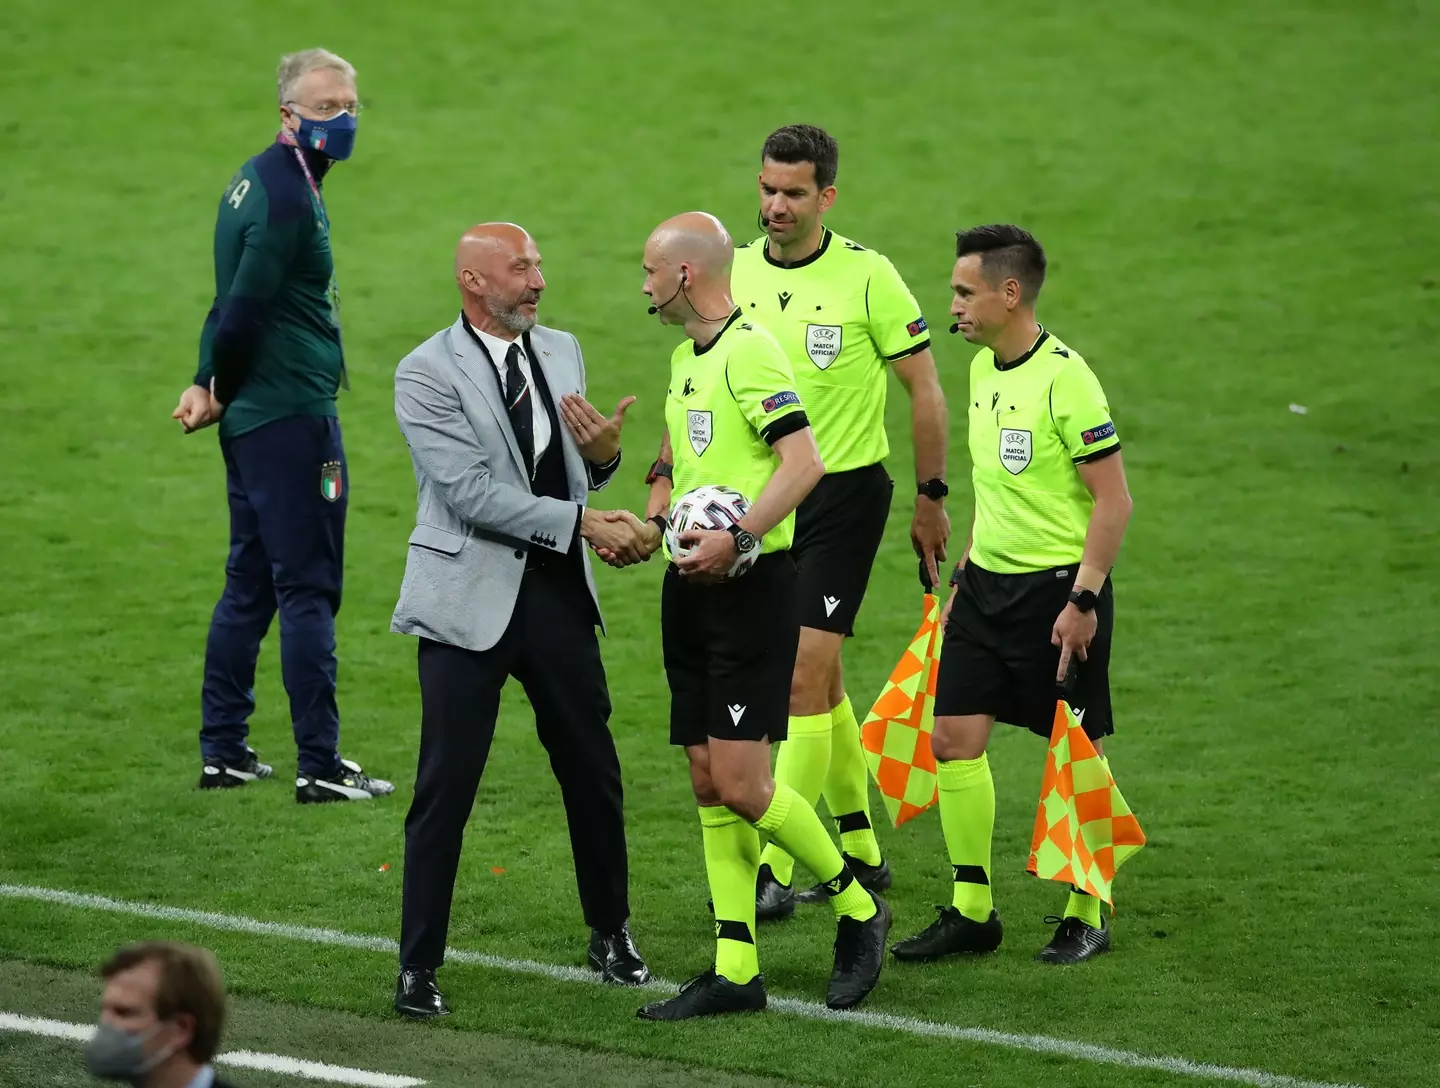 Anthony Taylor during the UEFA European Championships (Image: Sportimage/Alamy)